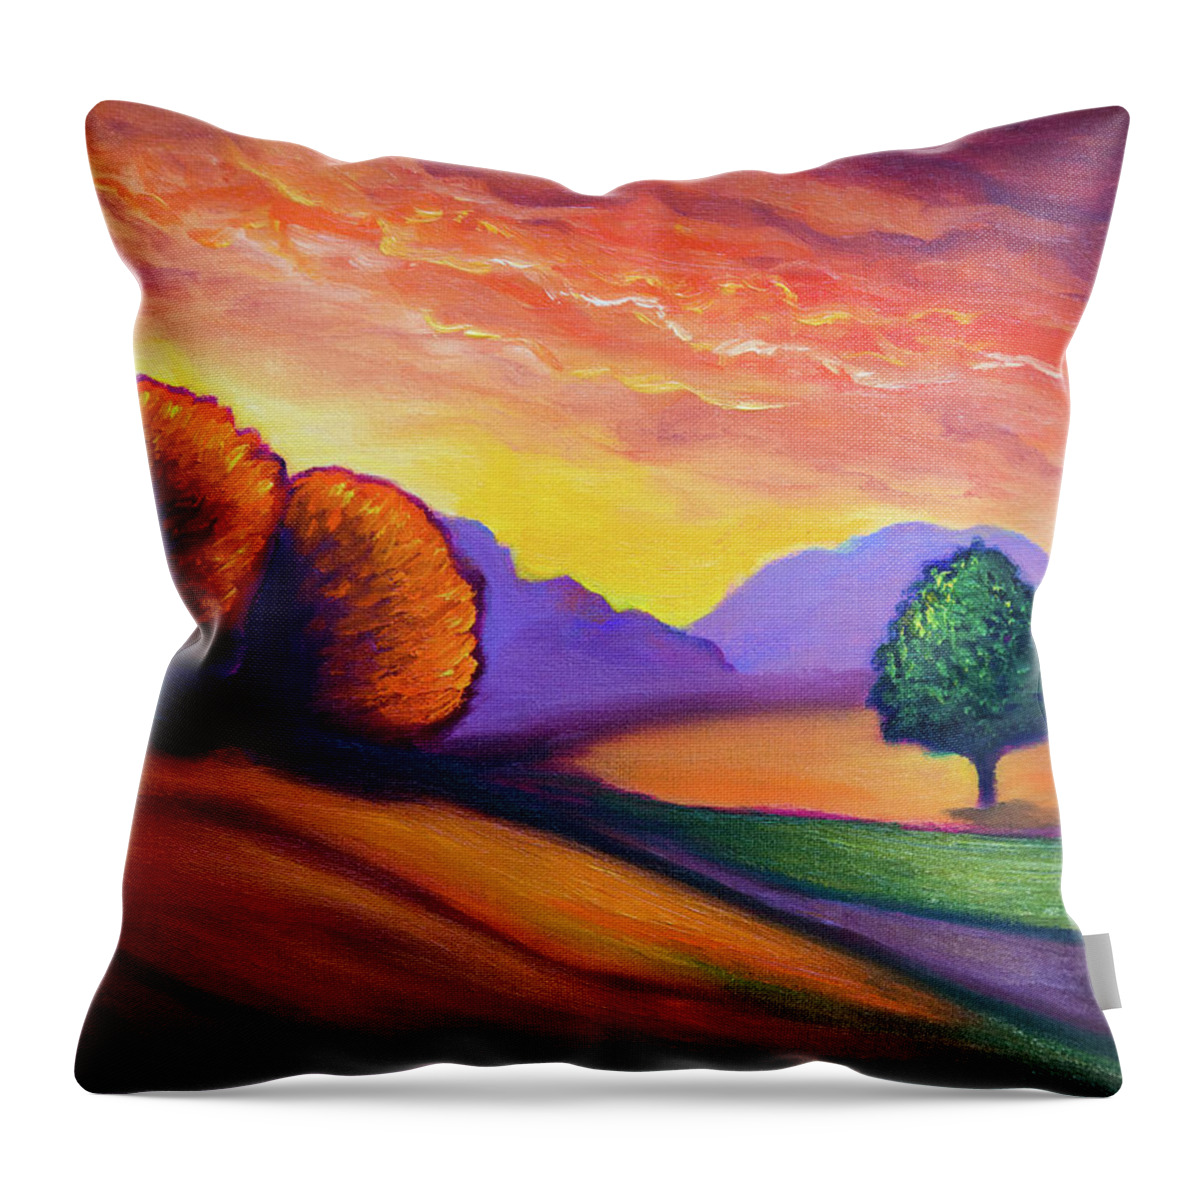 Golden Hour Throw Pillow featuring the painting Golden hour landscape by Lilia S